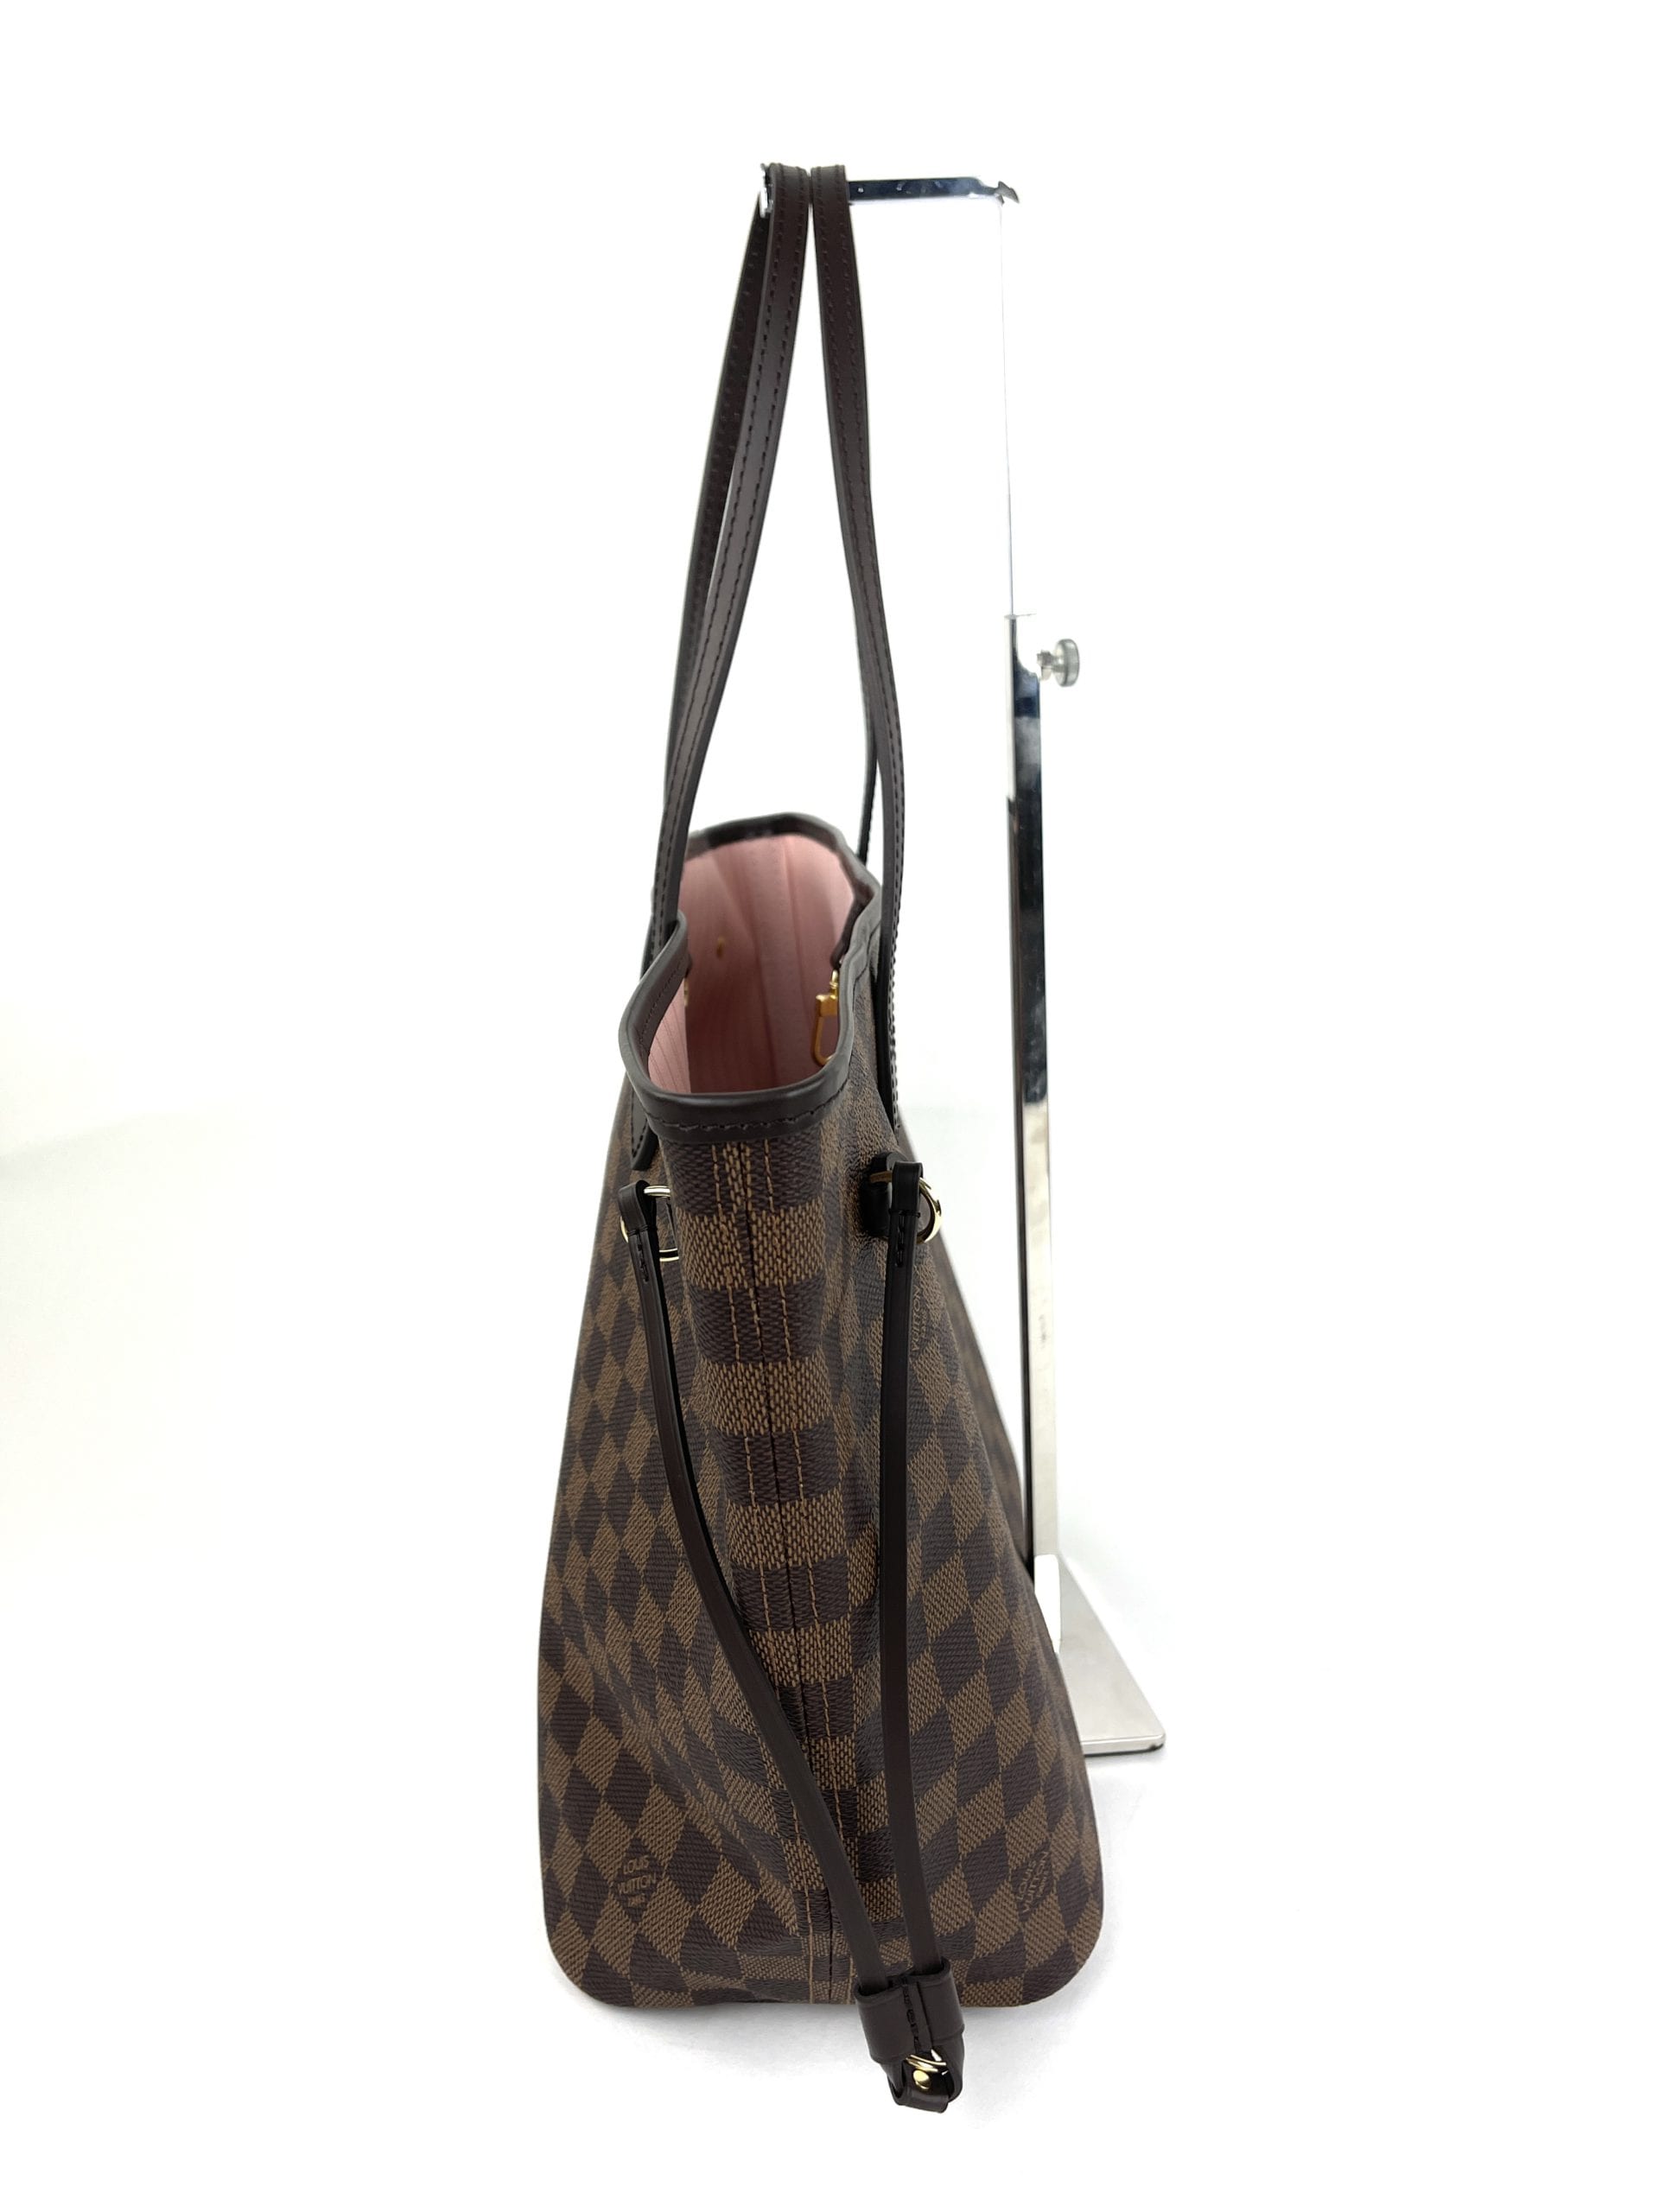 Louis Vuitton Ebene Neverfull MM Tote and Pouch Set with Rose